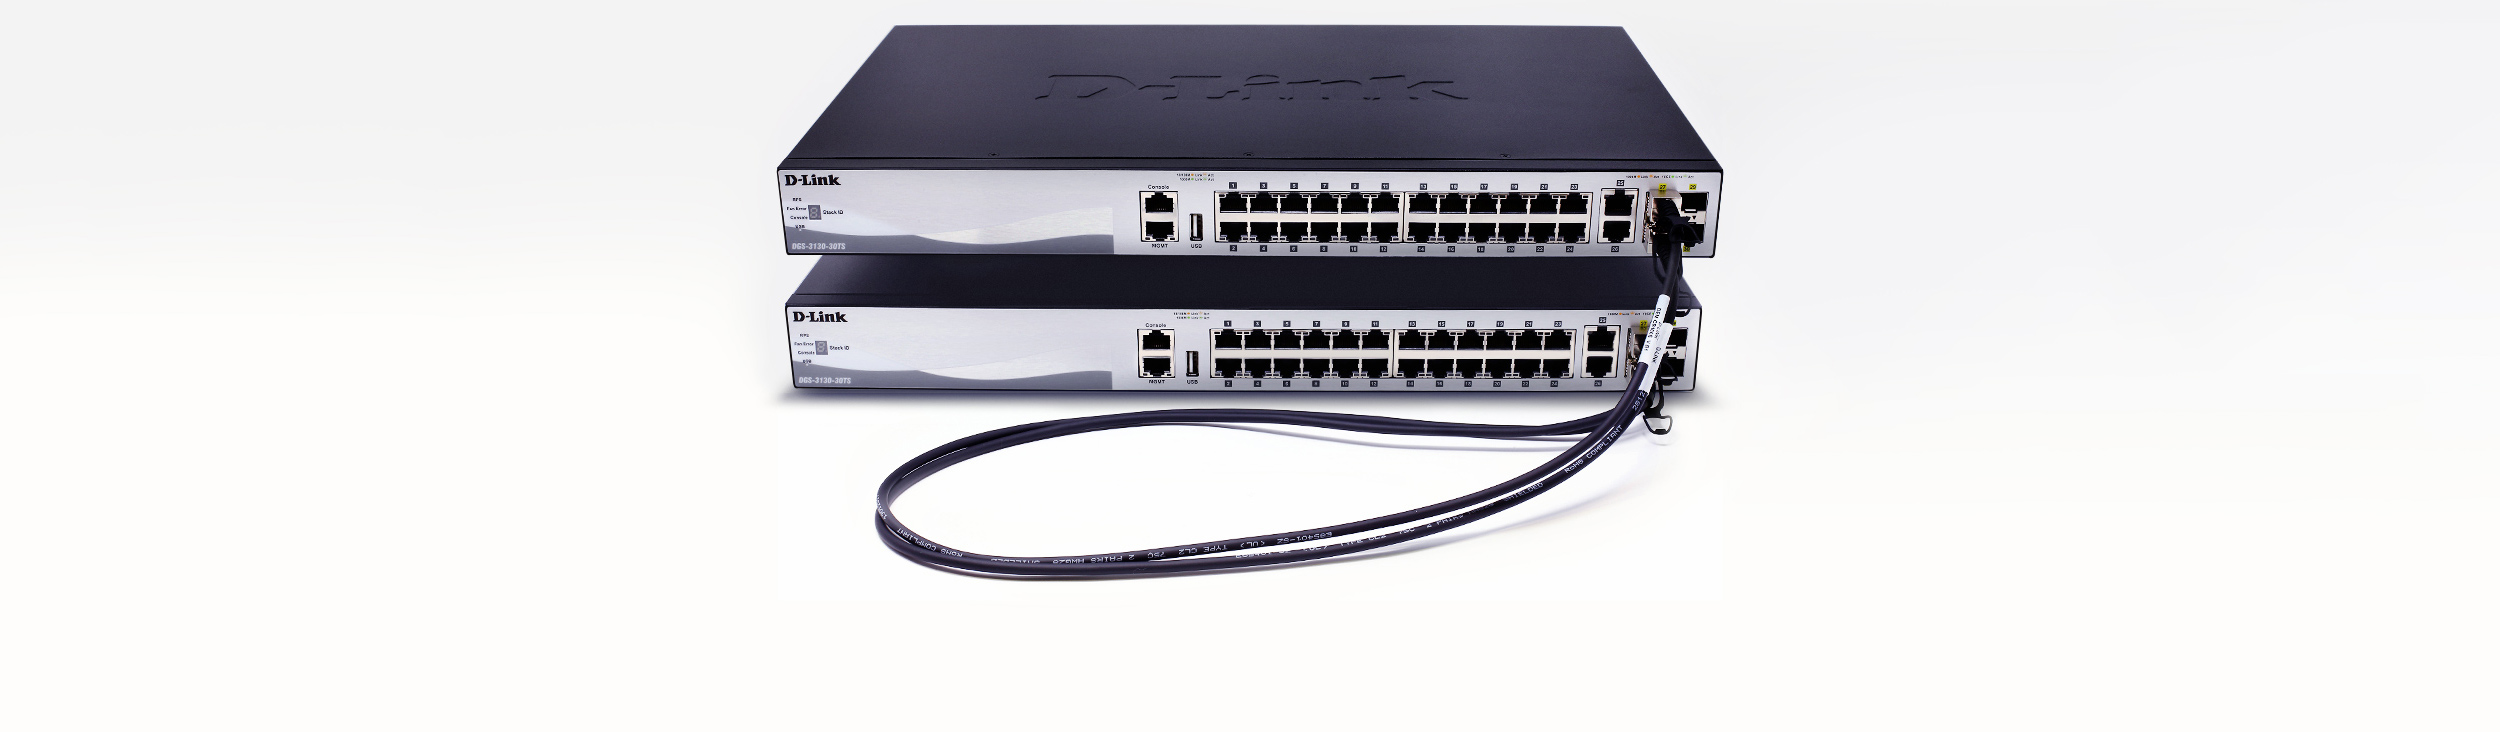 DGS-3130 Gigabit Layer 3 Stackable Managed Switches